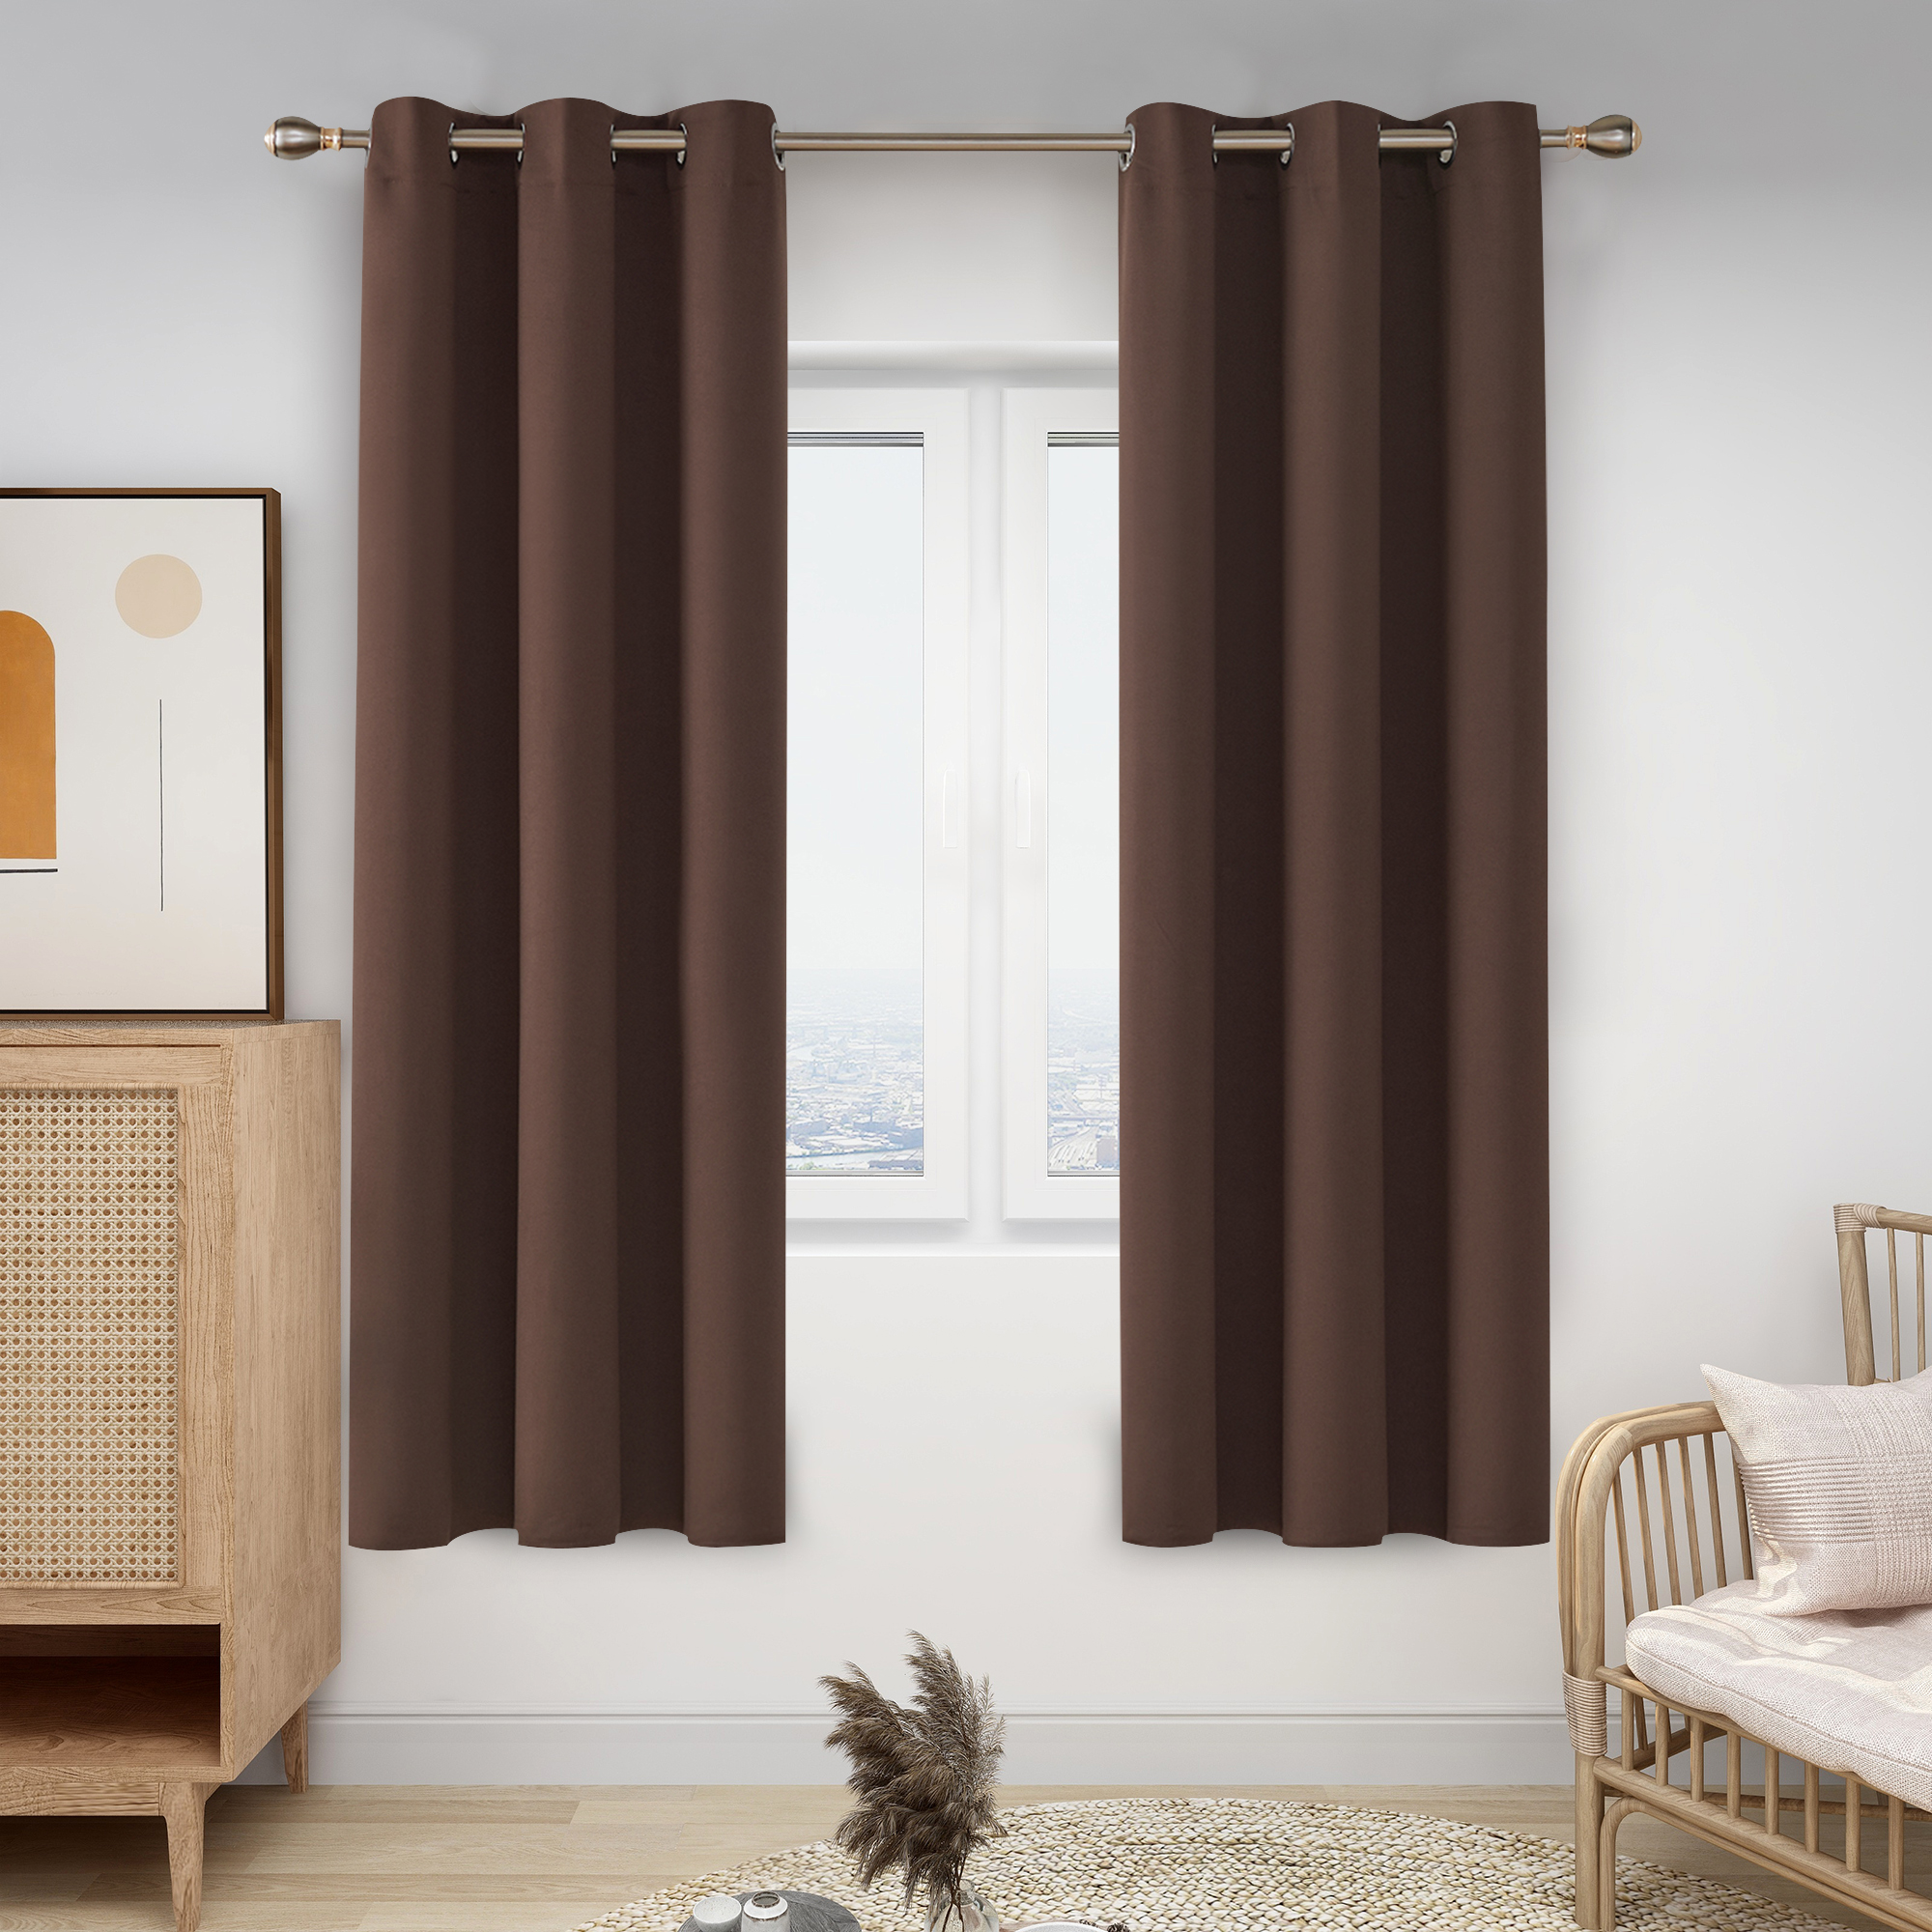 Yakamok Room Darkening Ombre Curtains for Bedroom, Thermal Insulated Gromme 